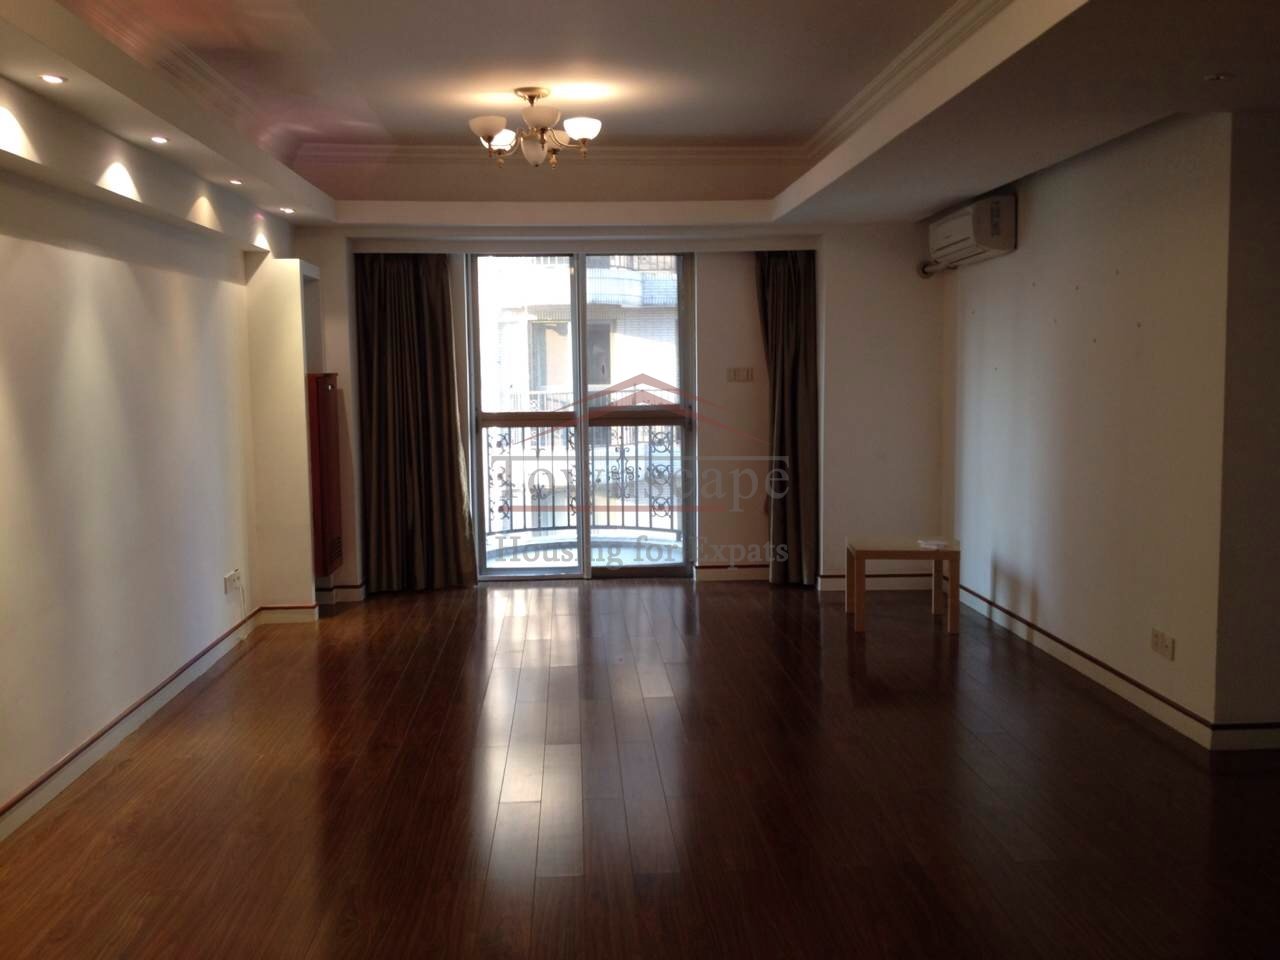 Expat Housing Shanghai Spacious 2 Bed Apartment in French Concession L9 Jiashan rd